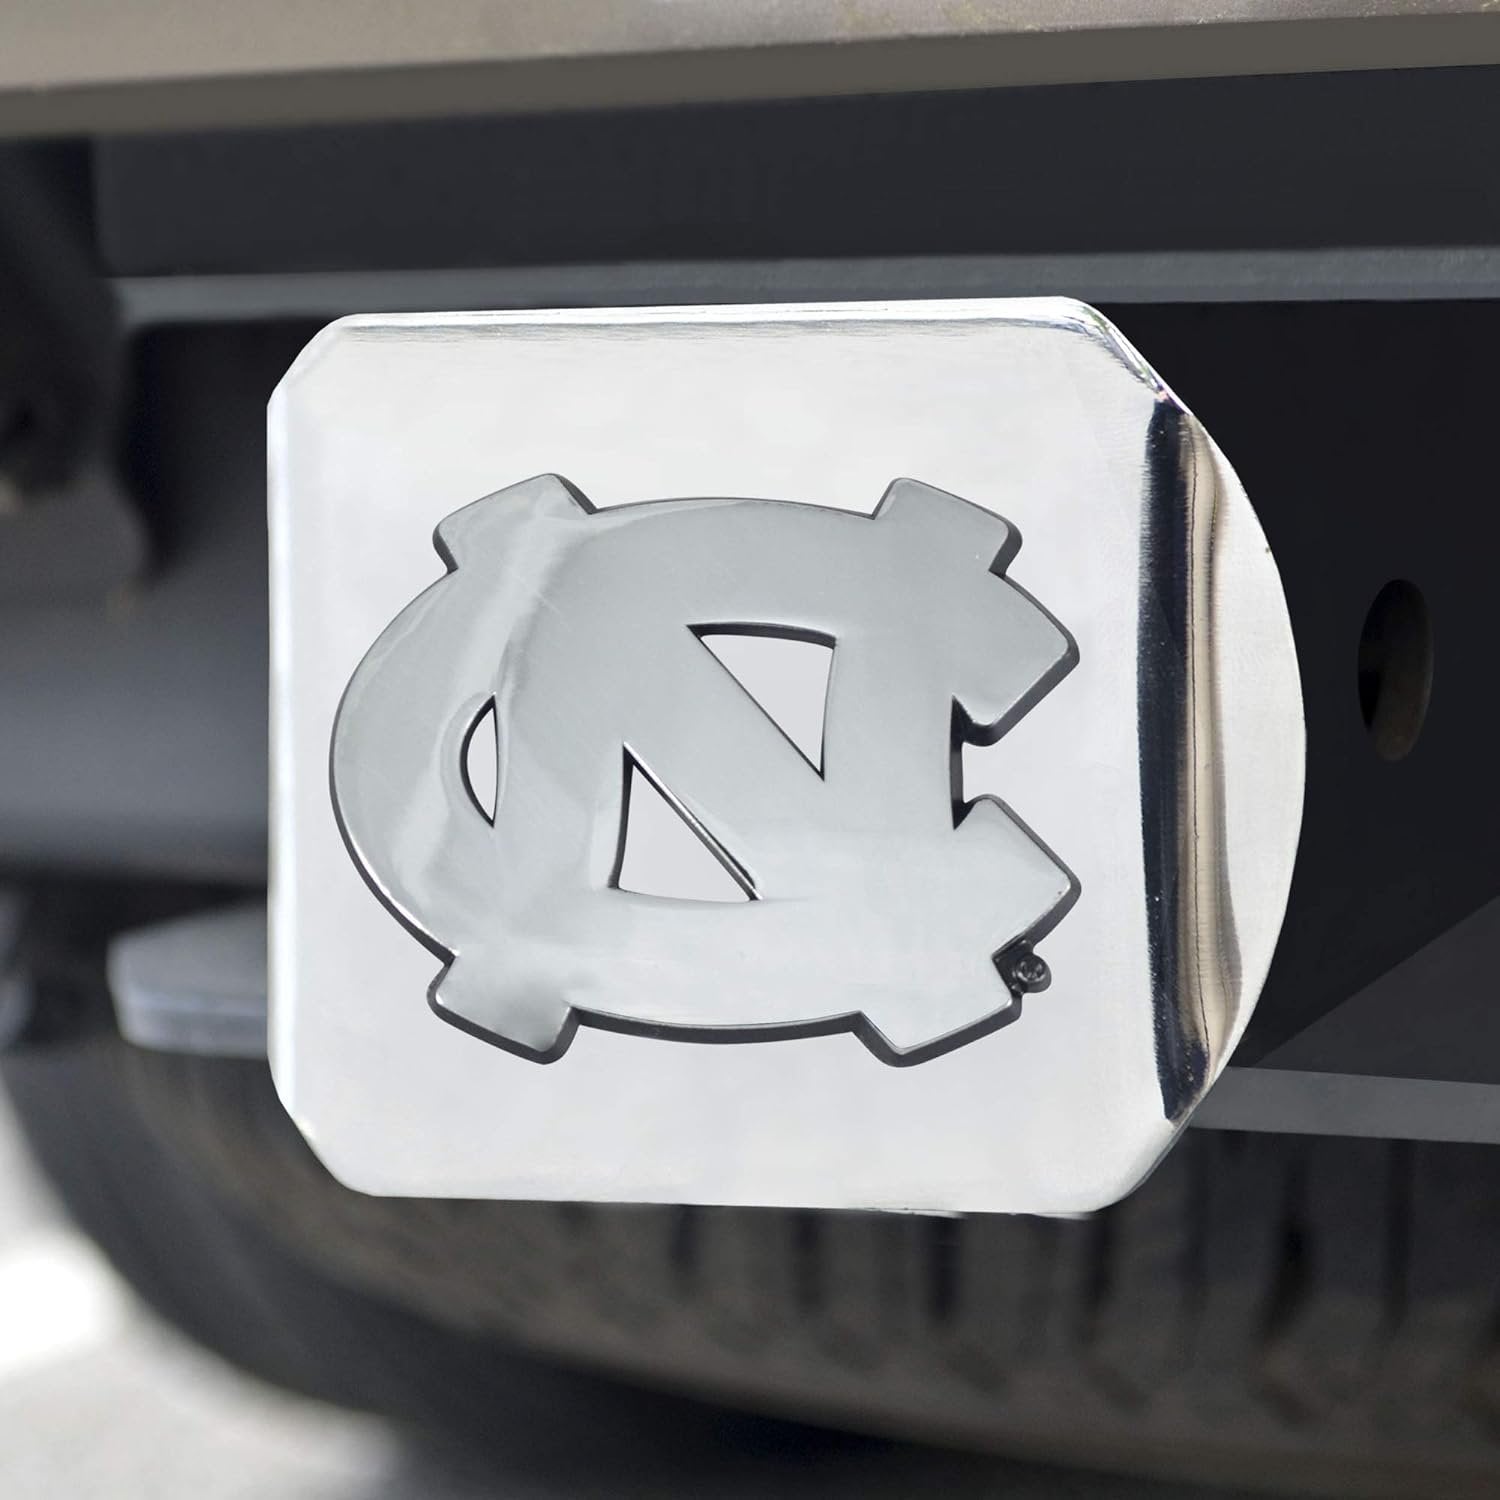 University of North Carolina Tar Heels Hitch Cover Solid Metal with Raised Chrome Metal Emblem 2" Square Type III